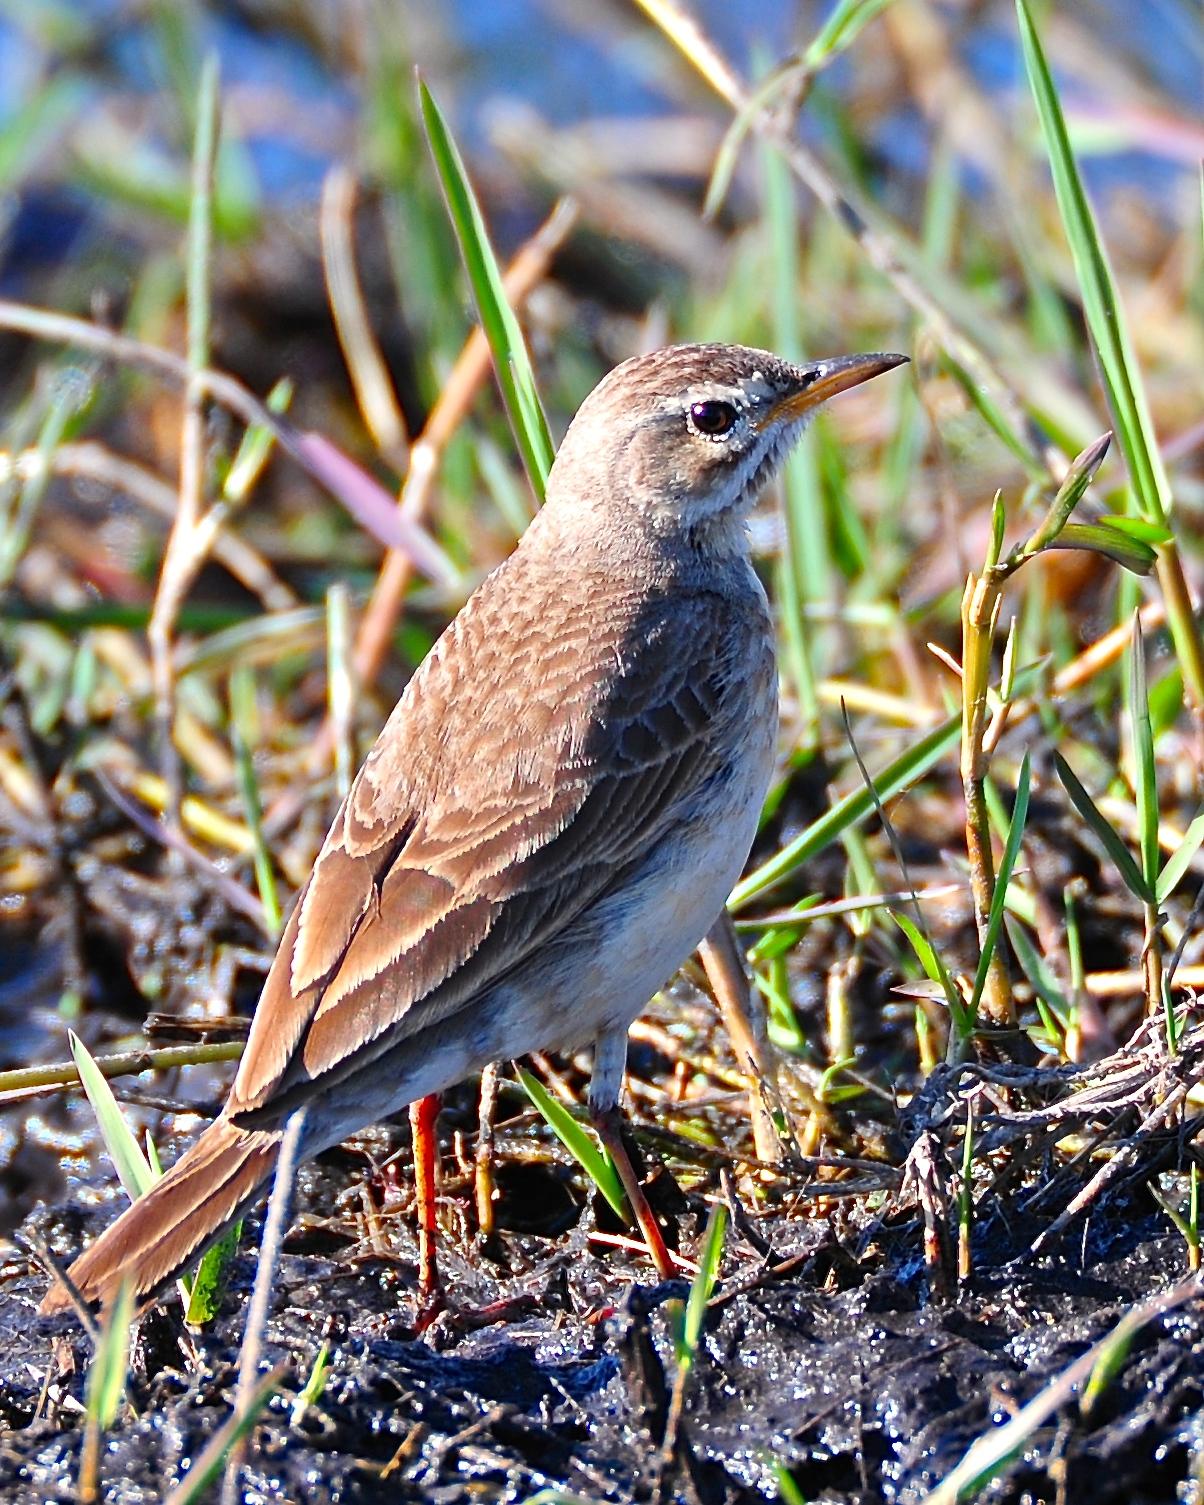 Plain-backed Pipit Photo by Gerald Friesen